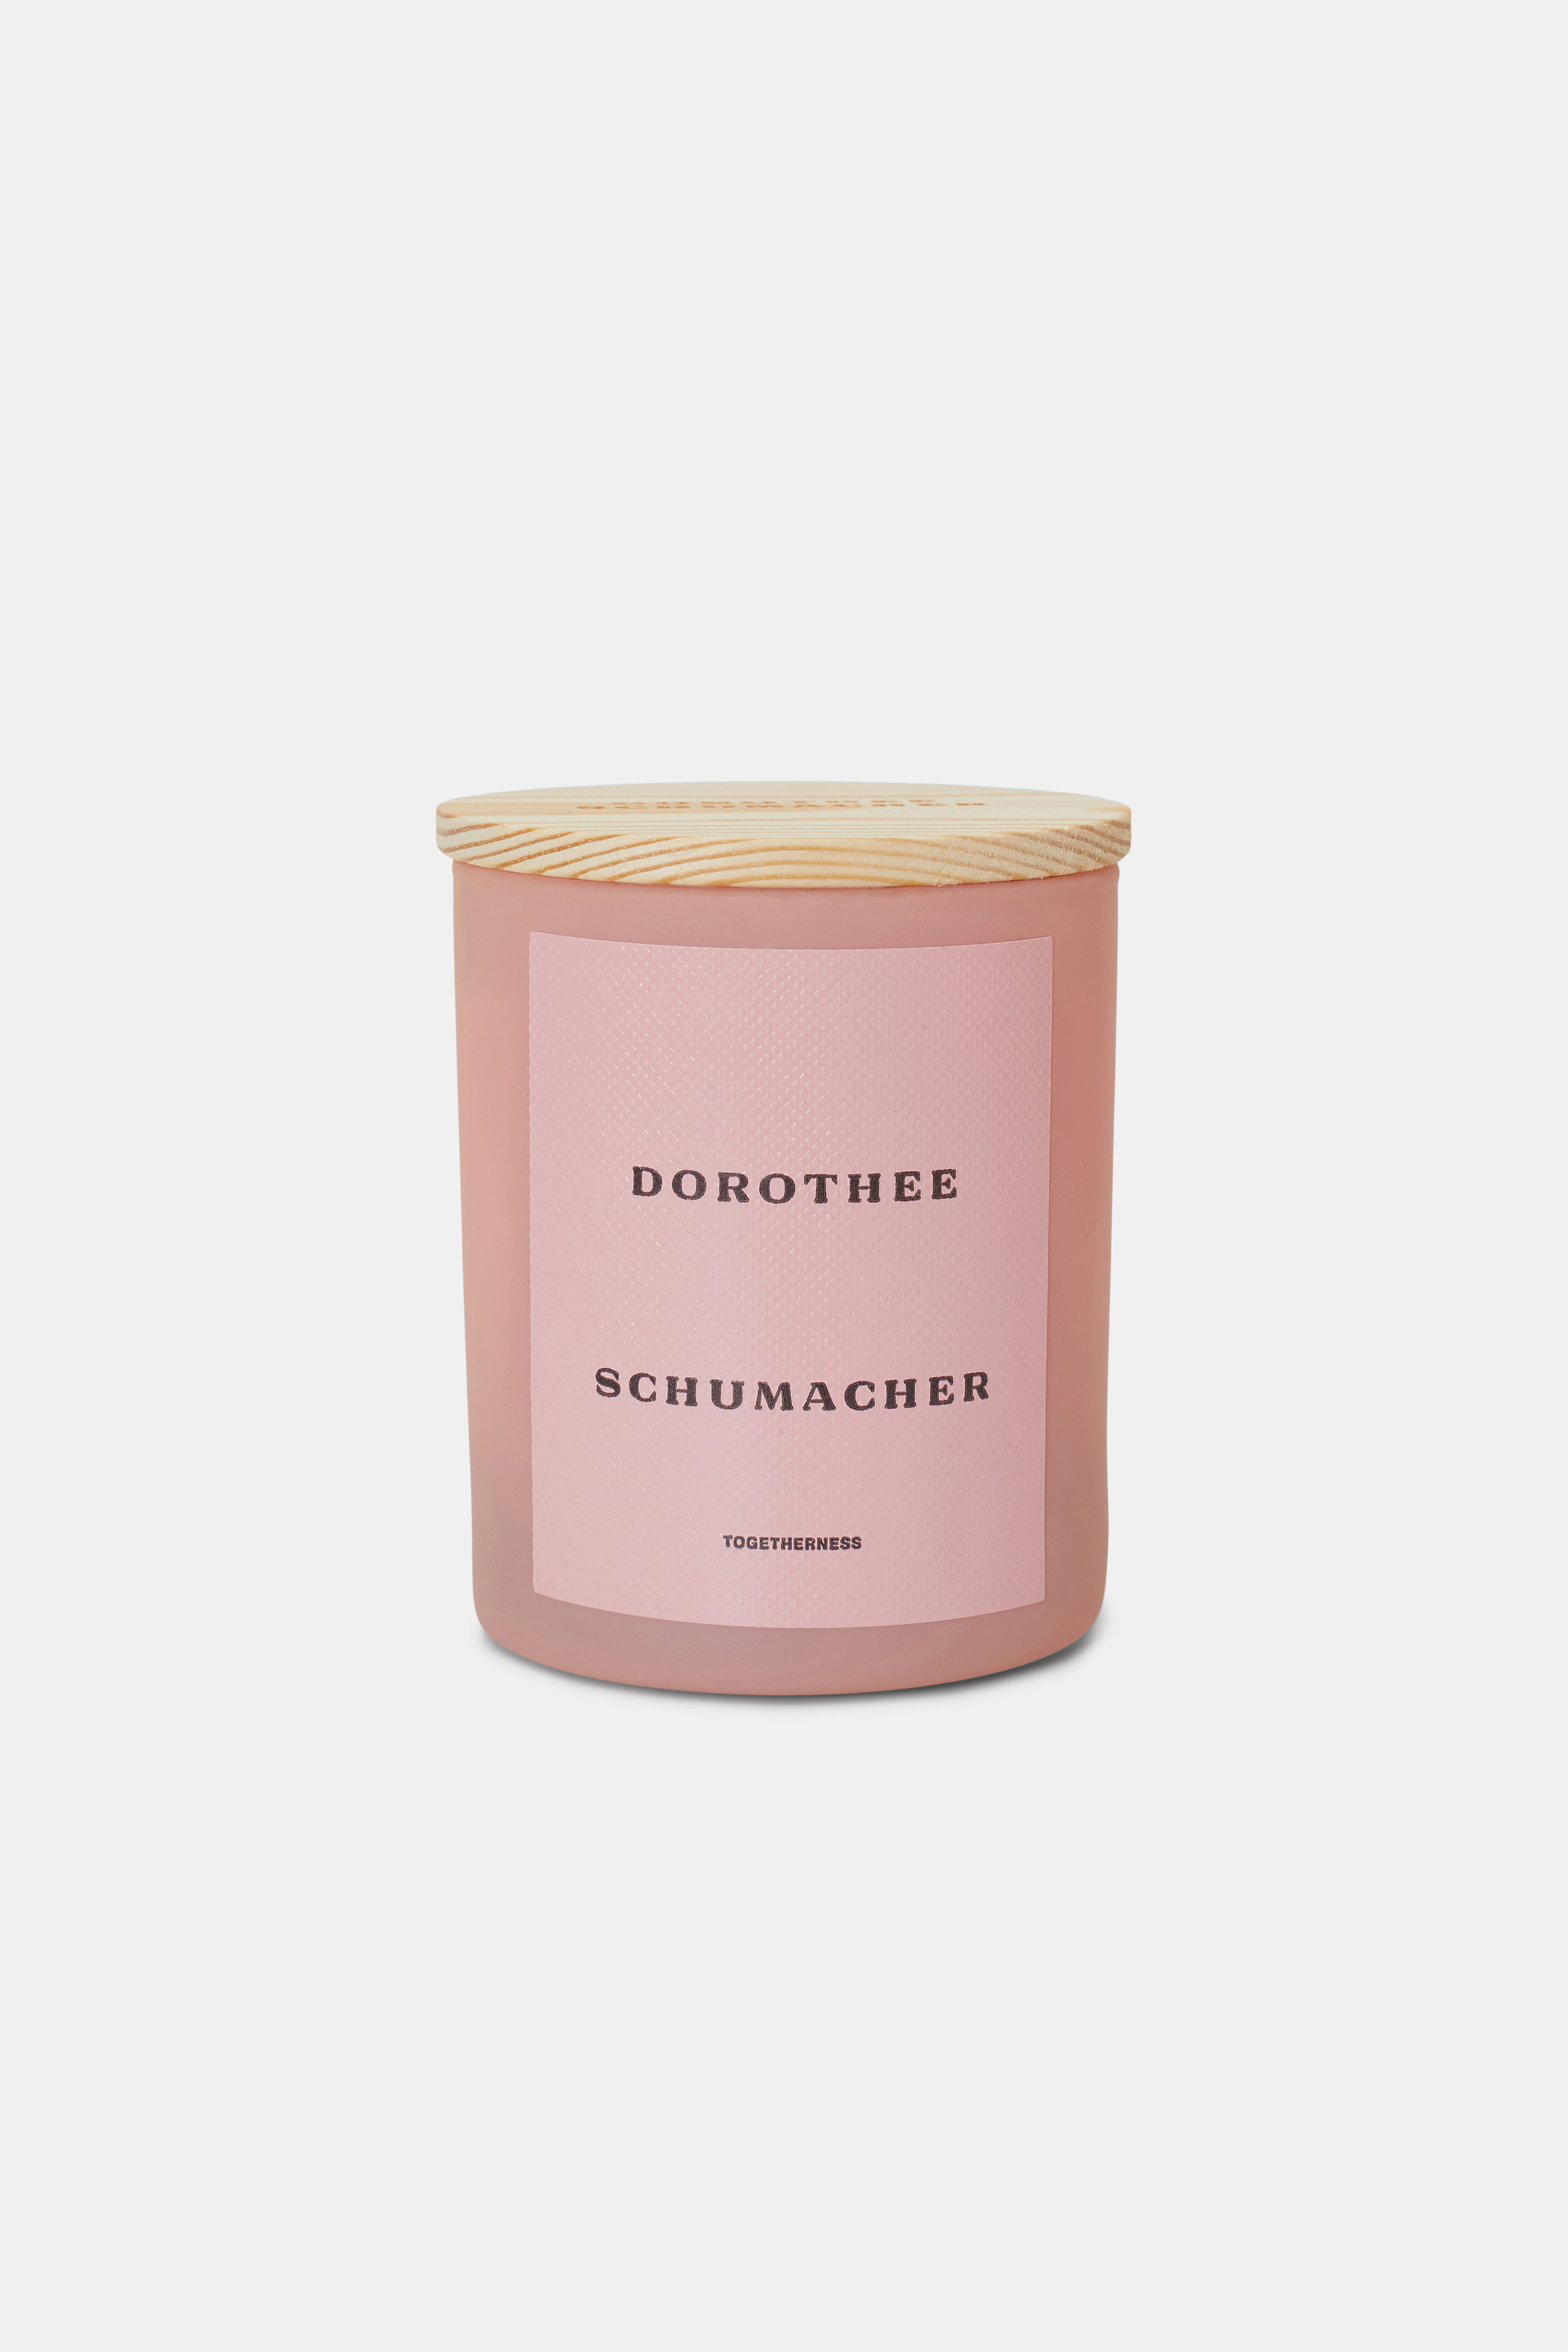 Dorothee Schumacher Scented Soy Wax Candle With Wooden Lid In Light Pink